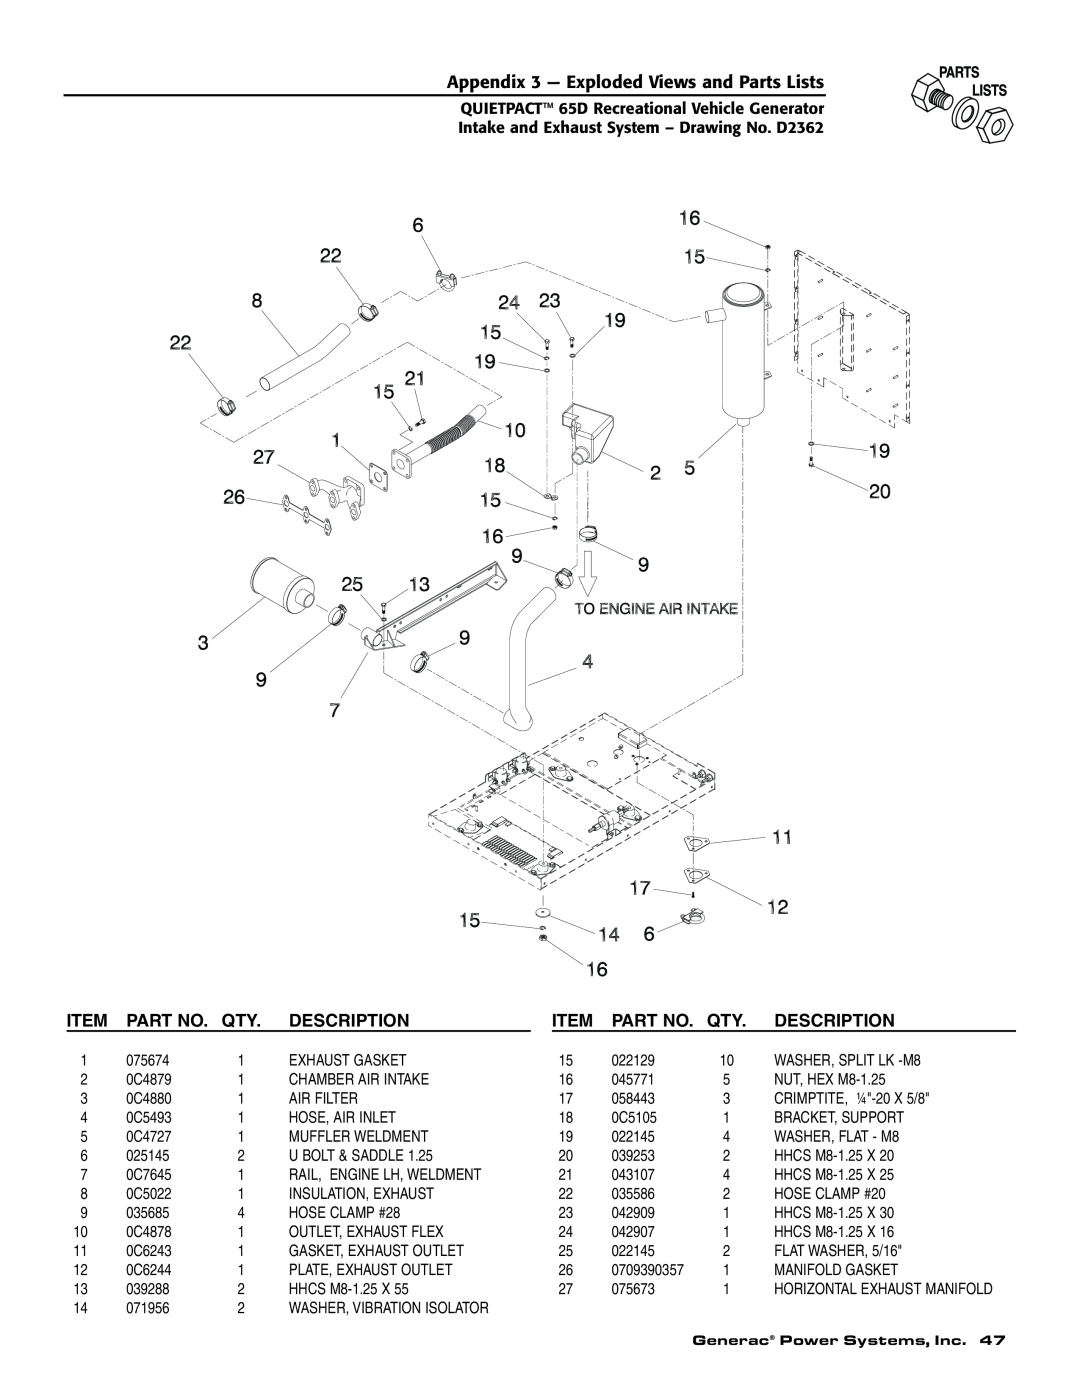 Generac 004614-1 owner manual Appendix 3 - Exploded Views and Parts Lists, Description, Horizontal Exhaust Manifold 